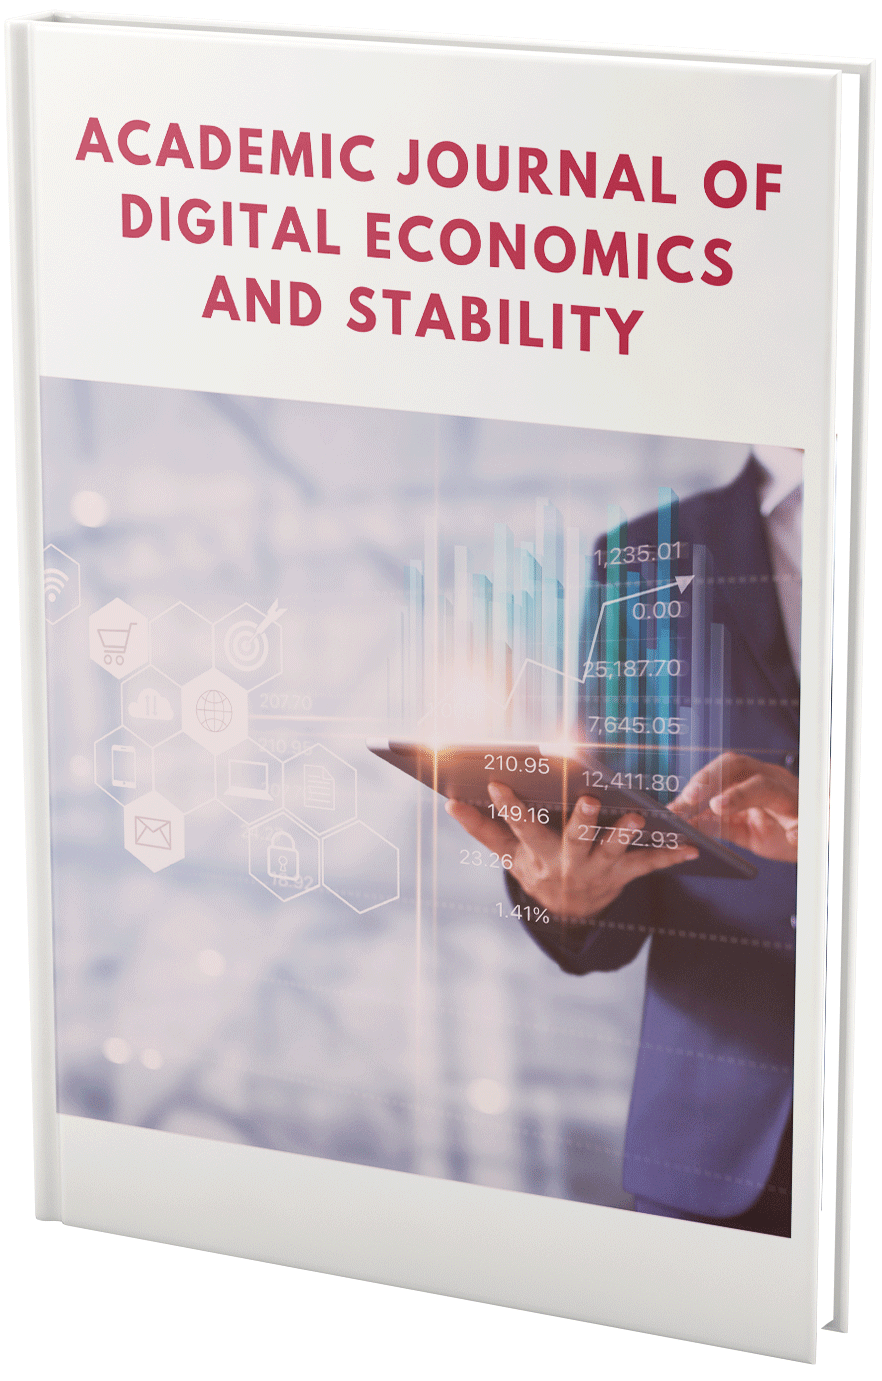 					View Vol. 5 (2021): Academic Journal of Digital Economics and Stability (Spain)
				